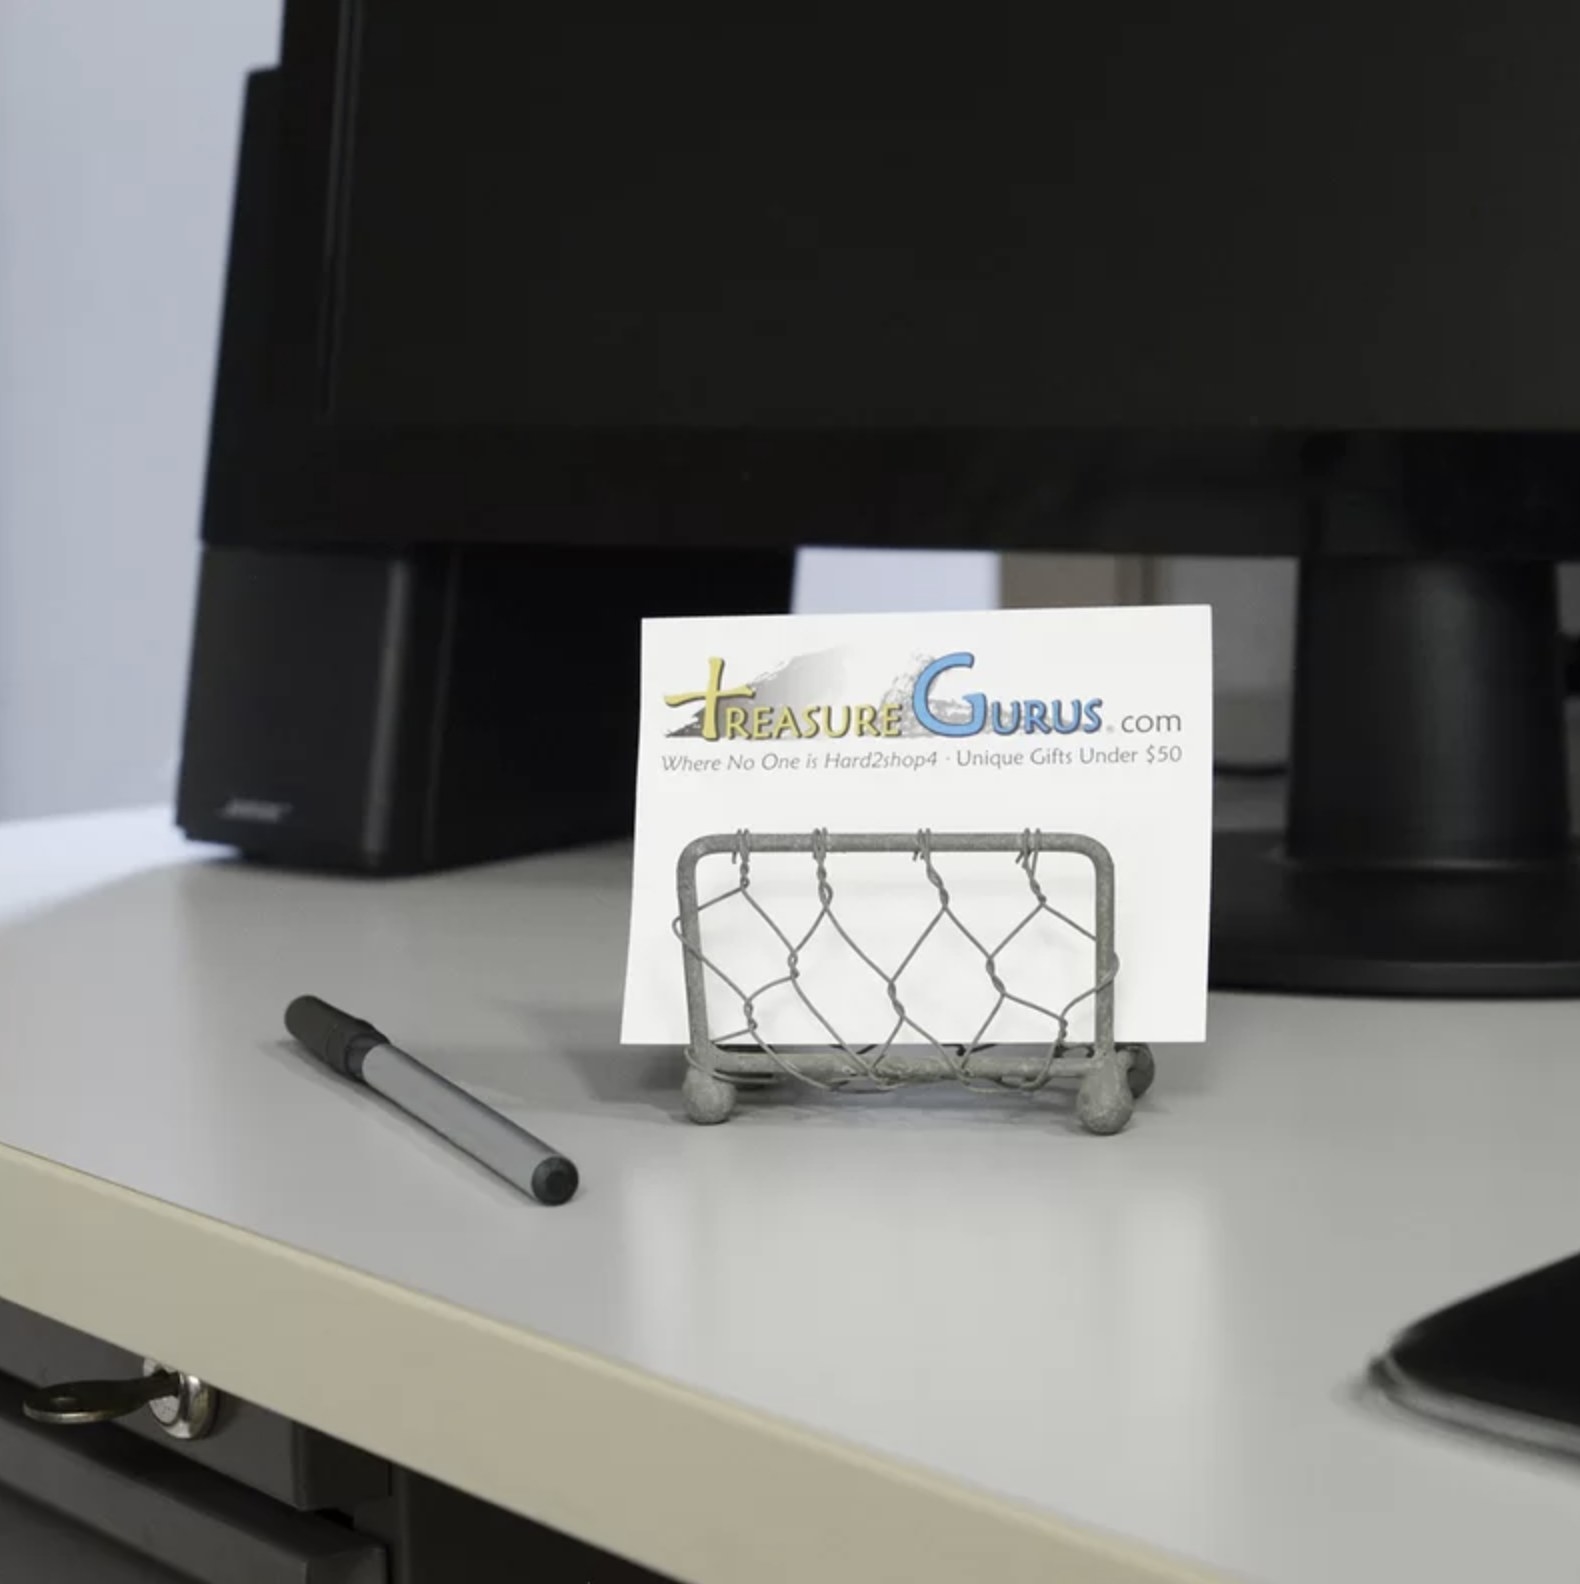 The metal wire business card holder